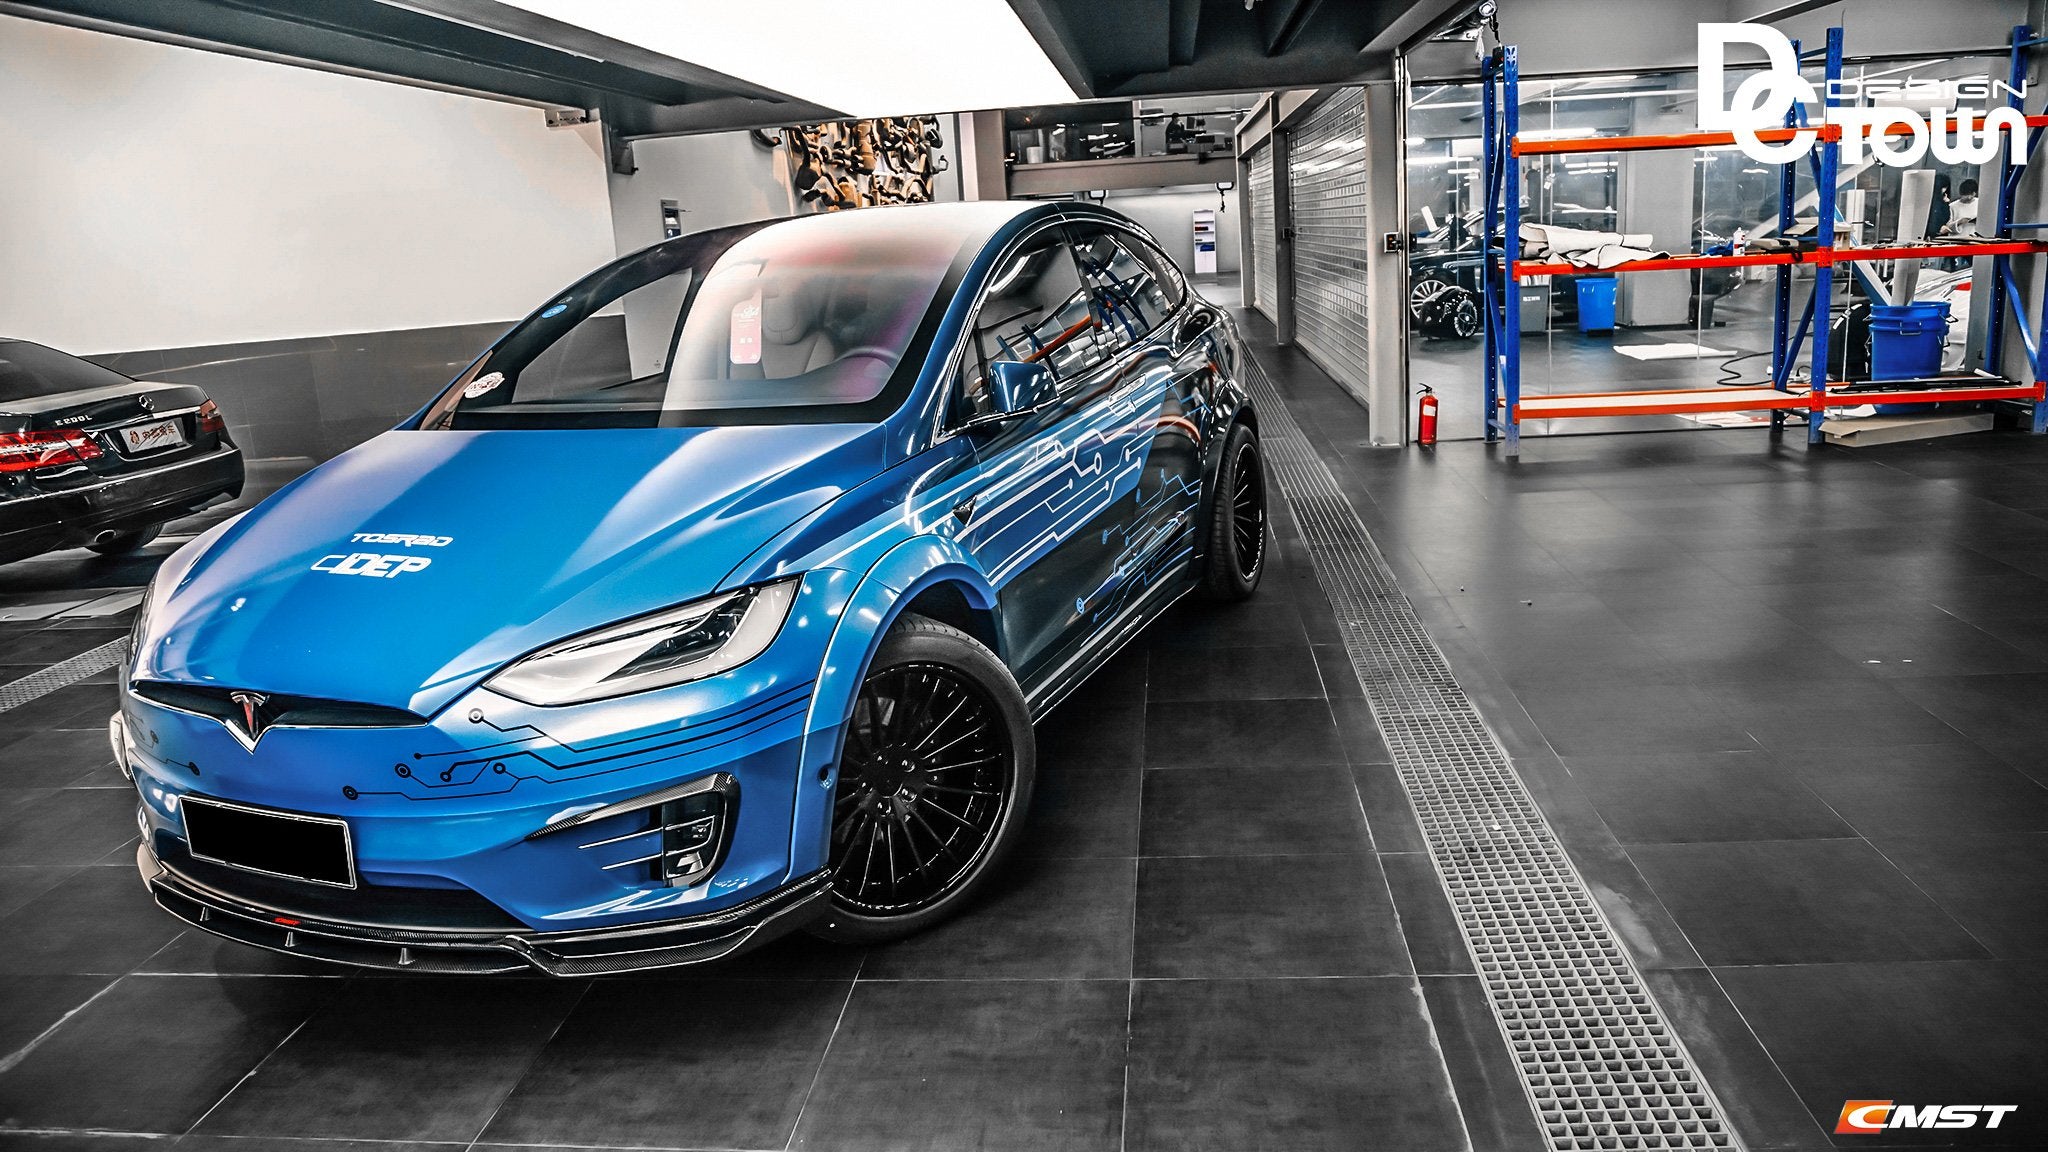 Check our price and buy CMST Carbon Fiber Body Kit set for Tesla Model X!